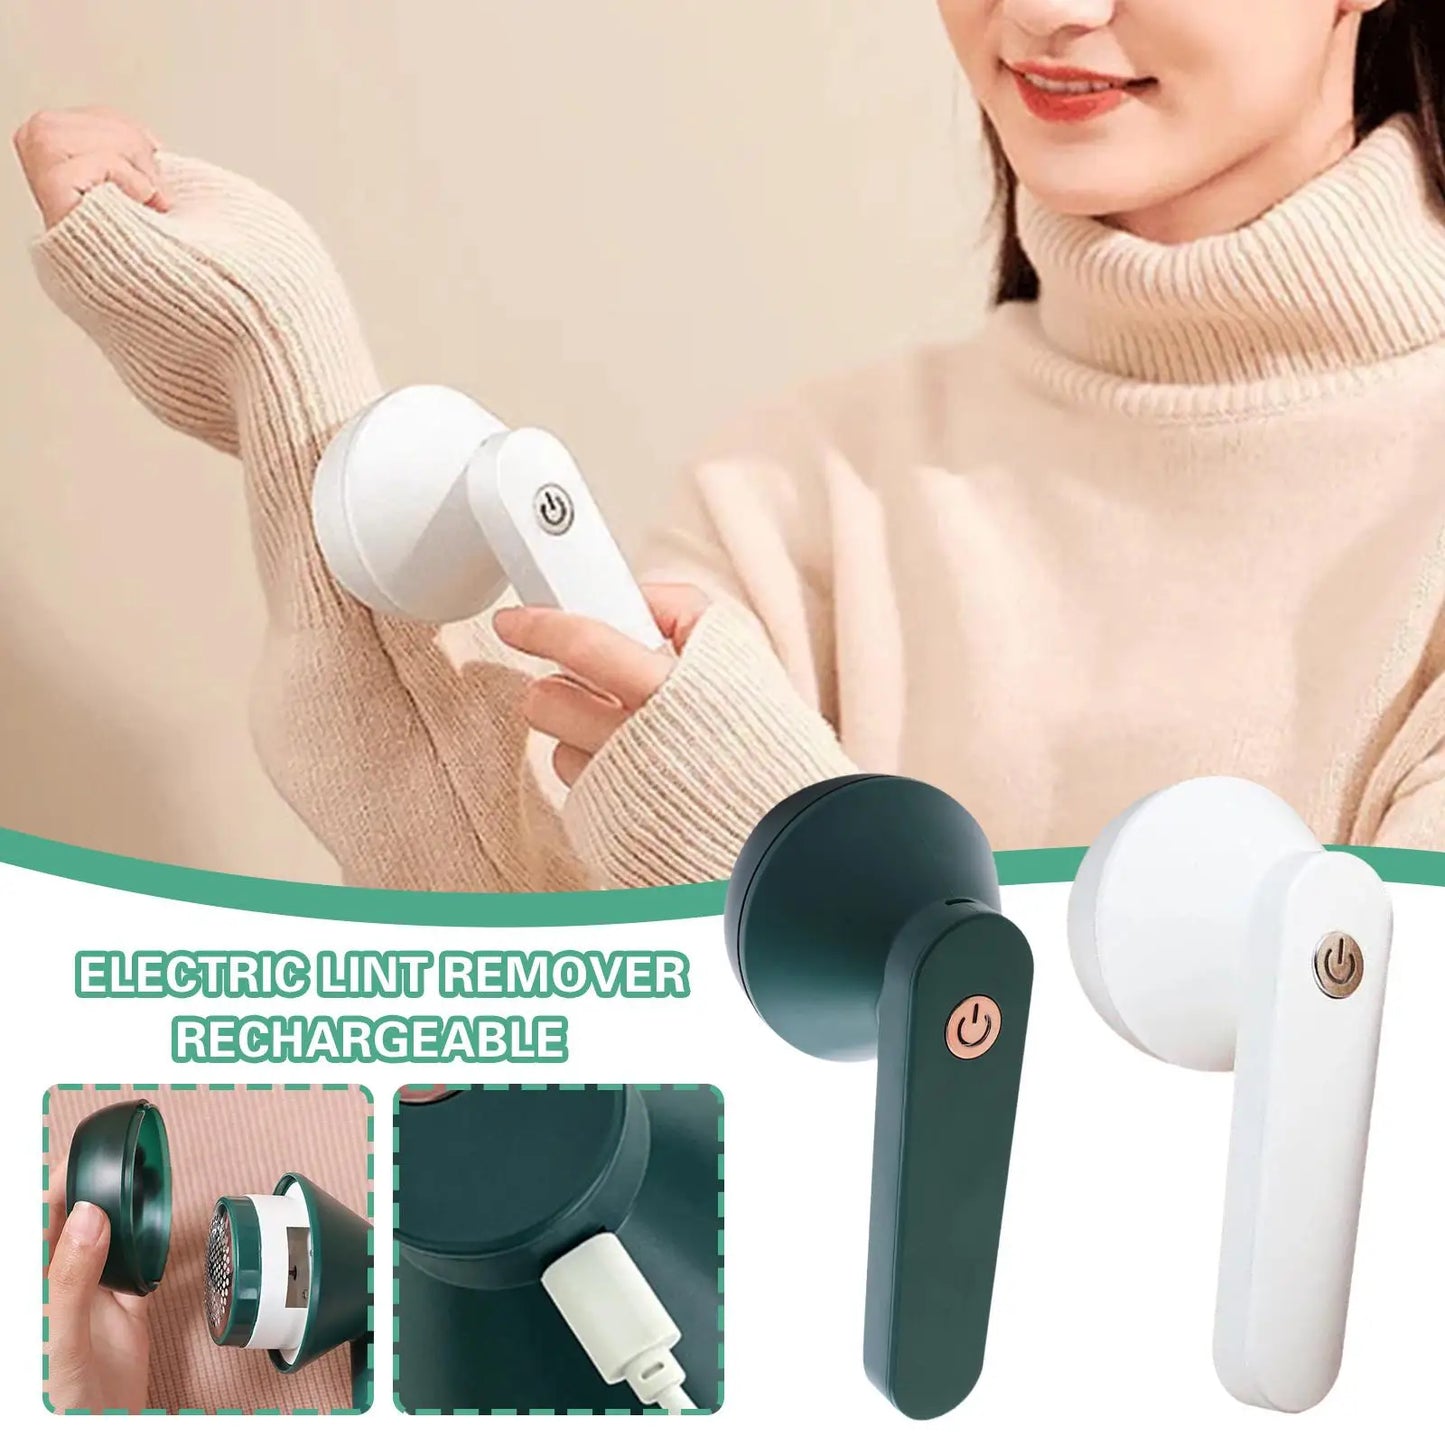 Electric Lint Remover Rechargeable for Clothing